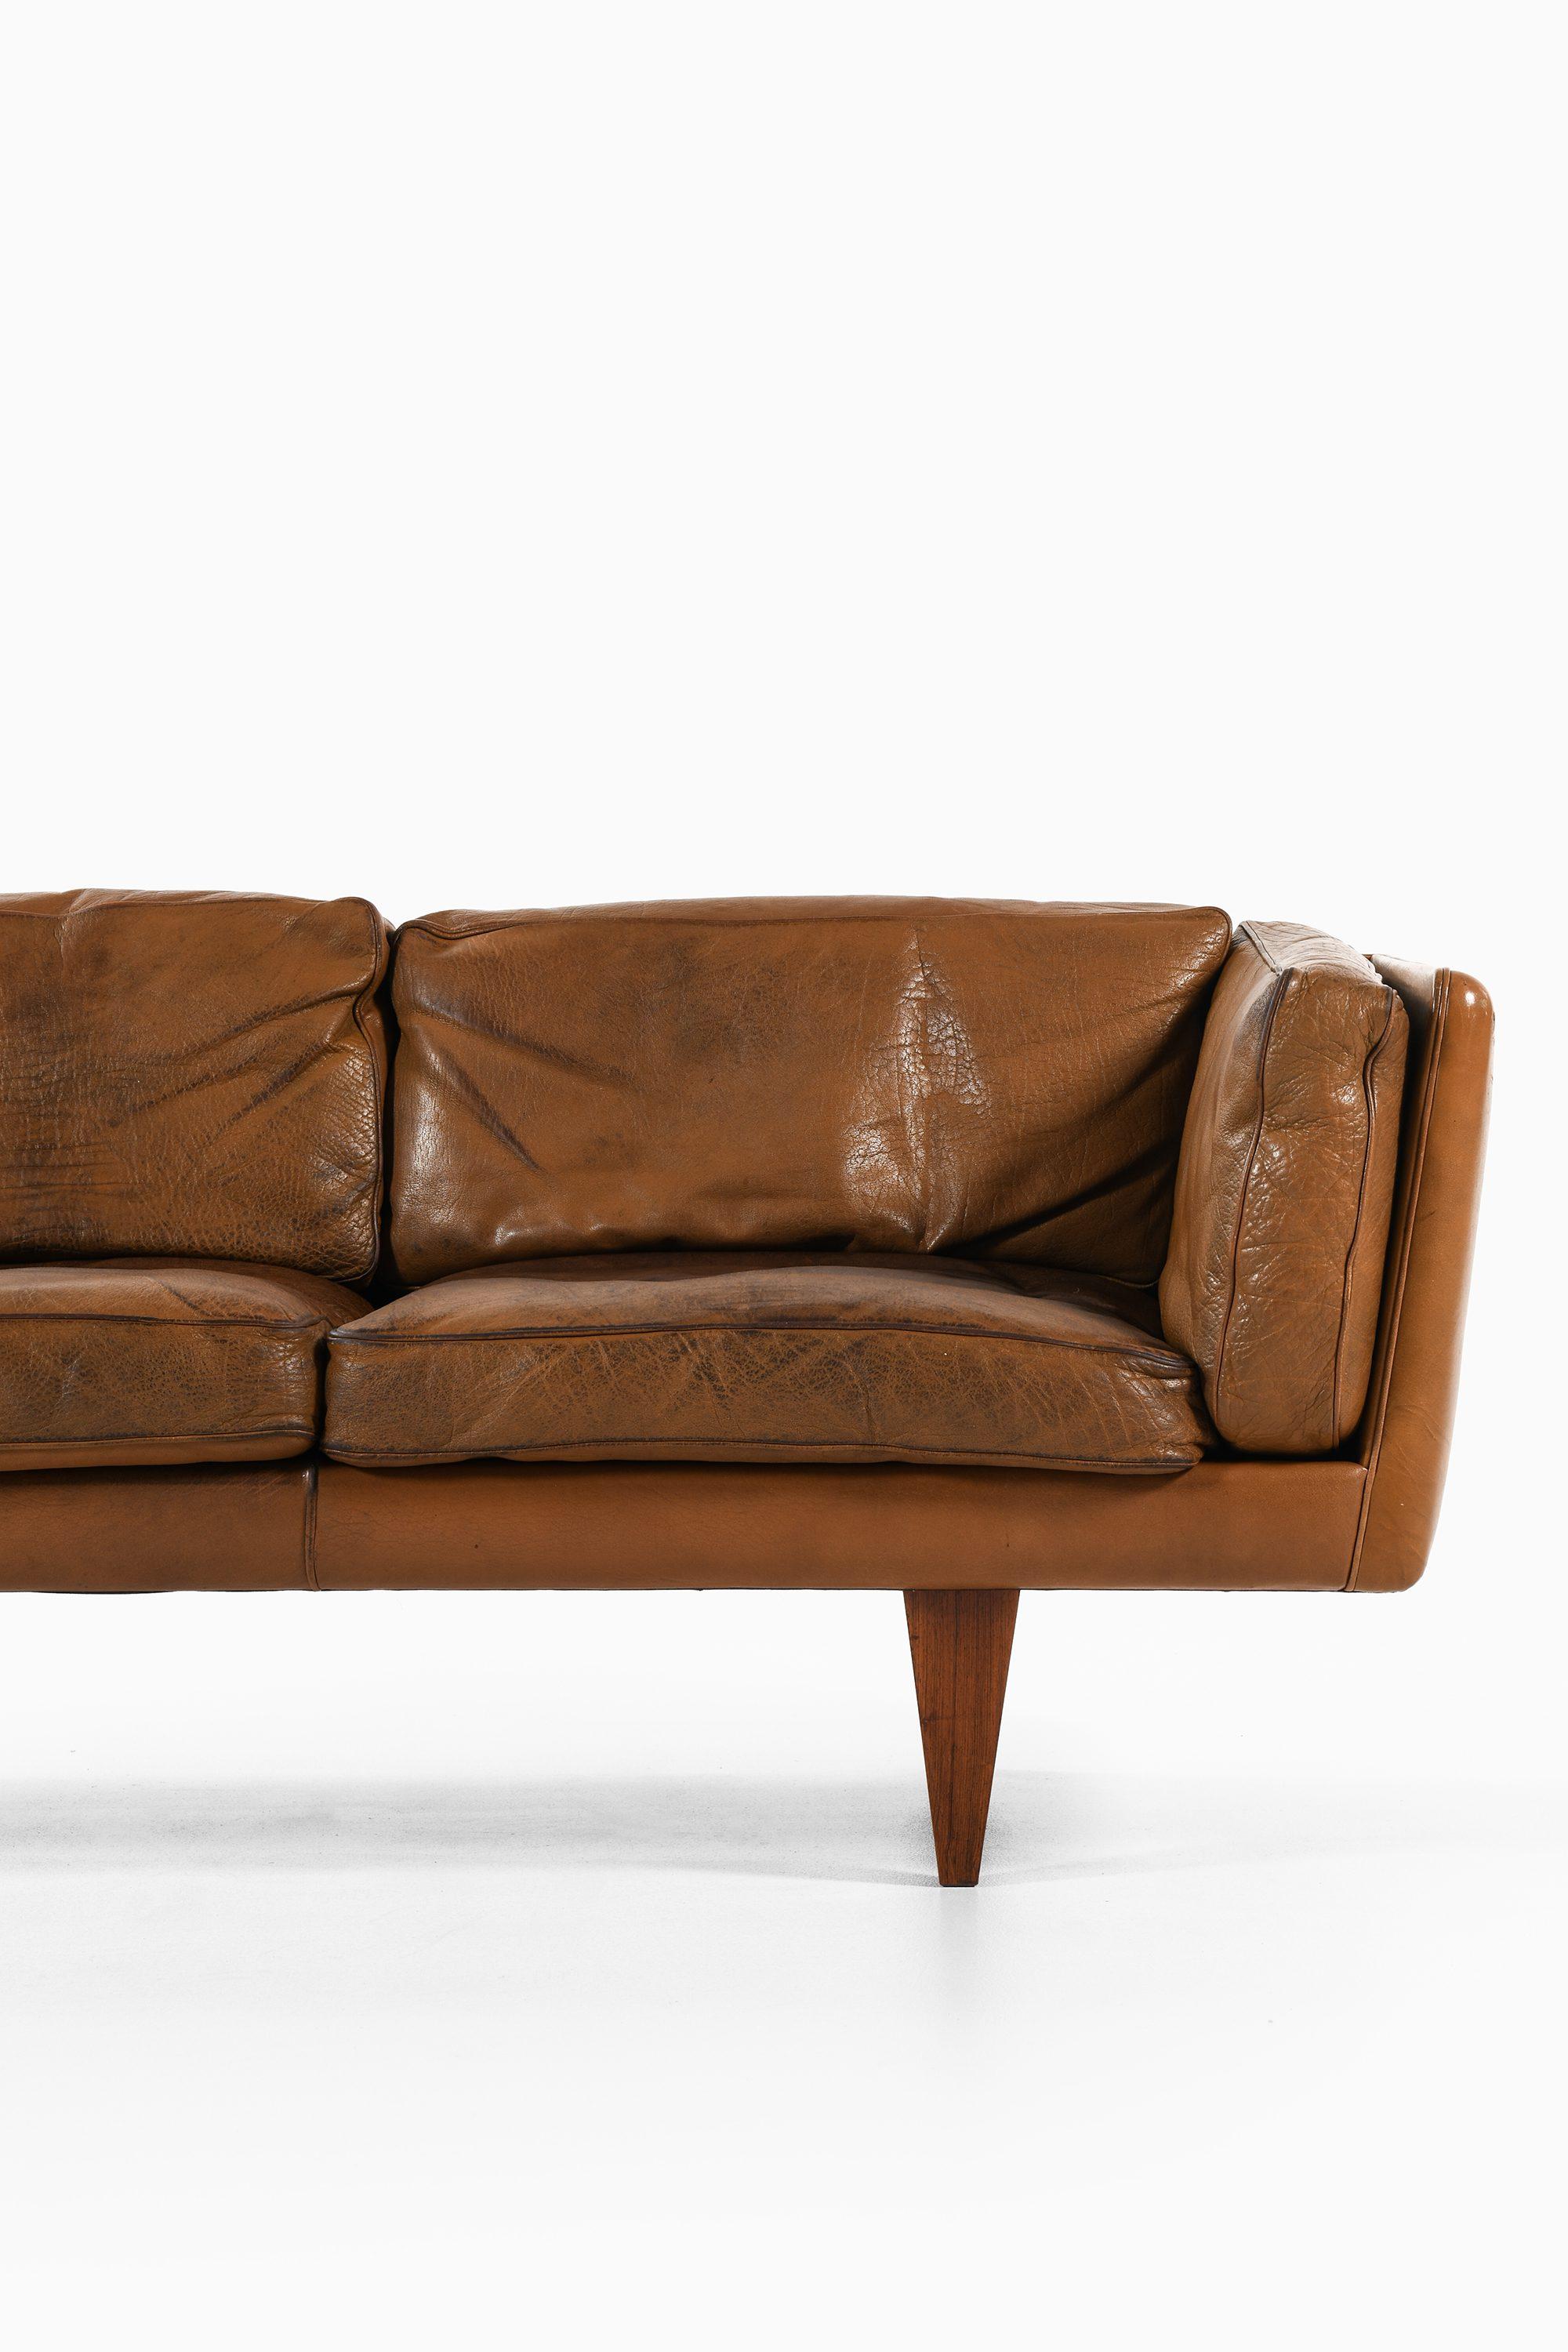 Danish Sofa in Rosewood and Original Brown Leather by Illum Wikkelsø, 1960's For Sale